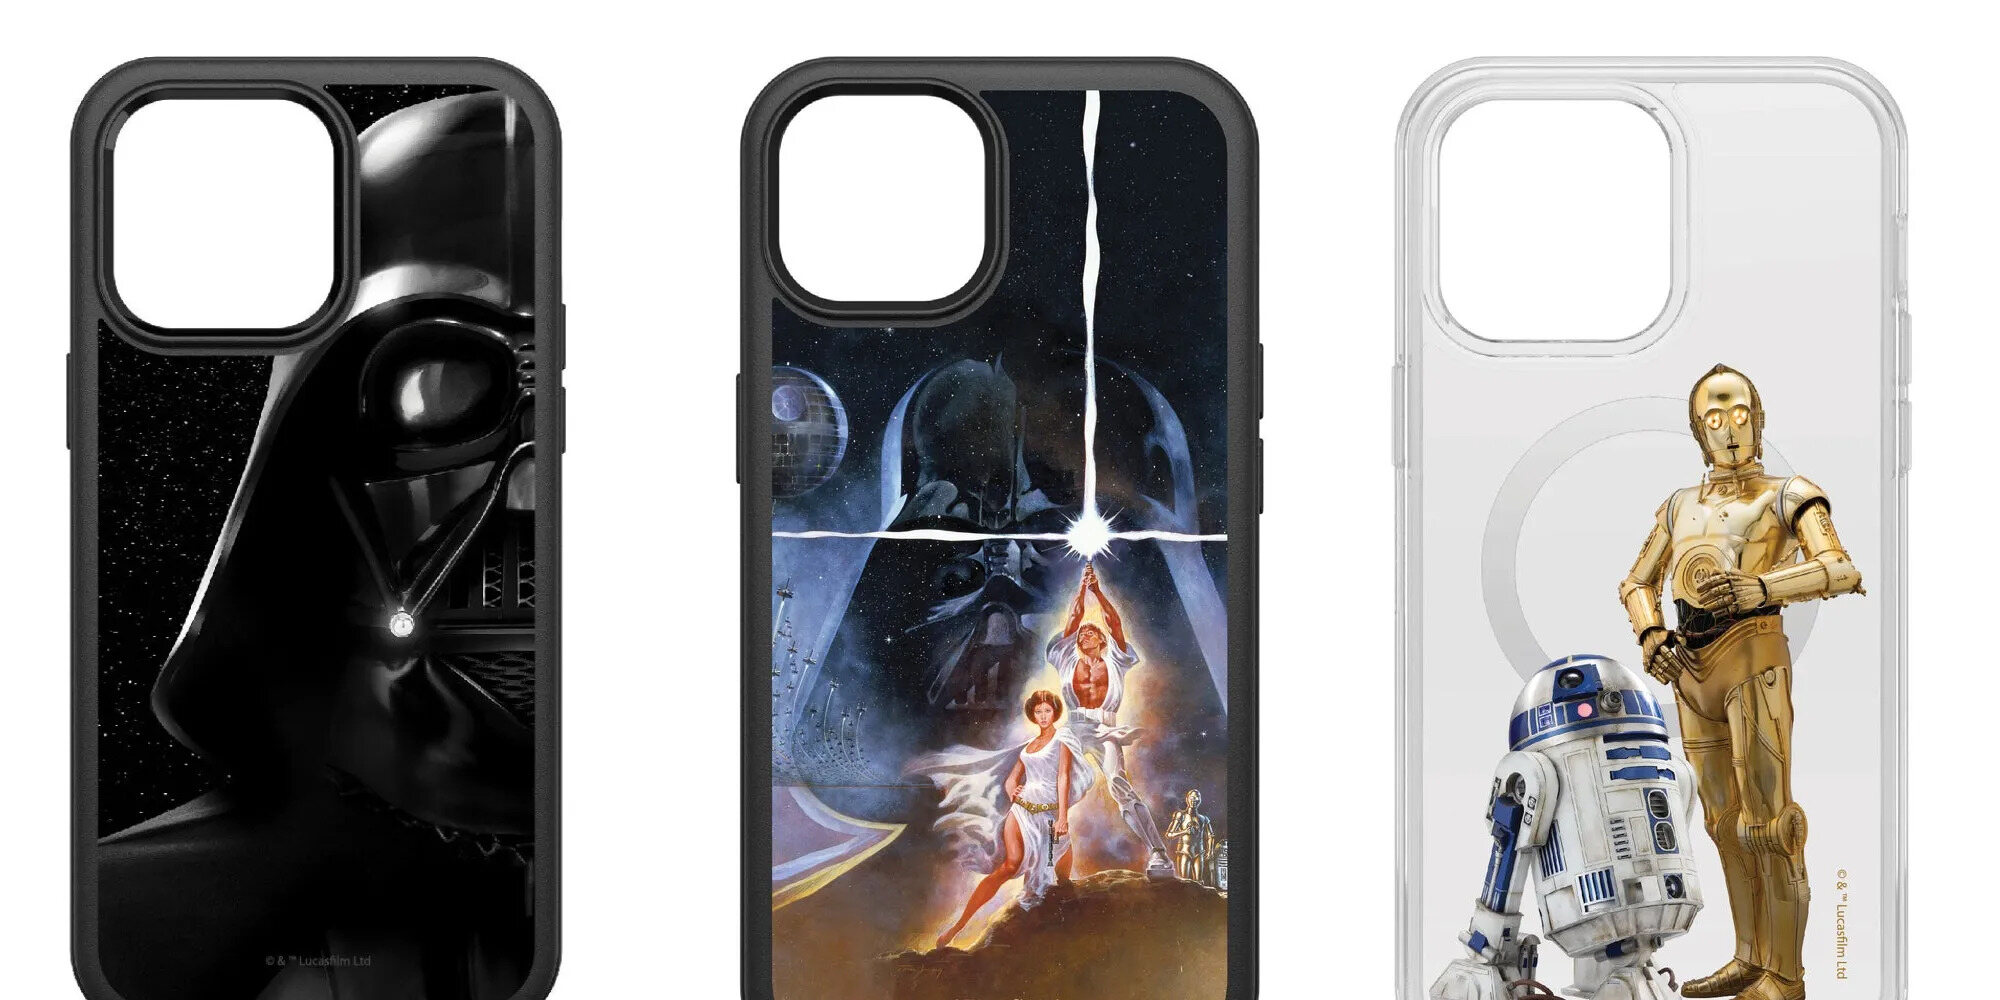 protect-your-phone-with-the-force-using-otterbox-star-wars-cases